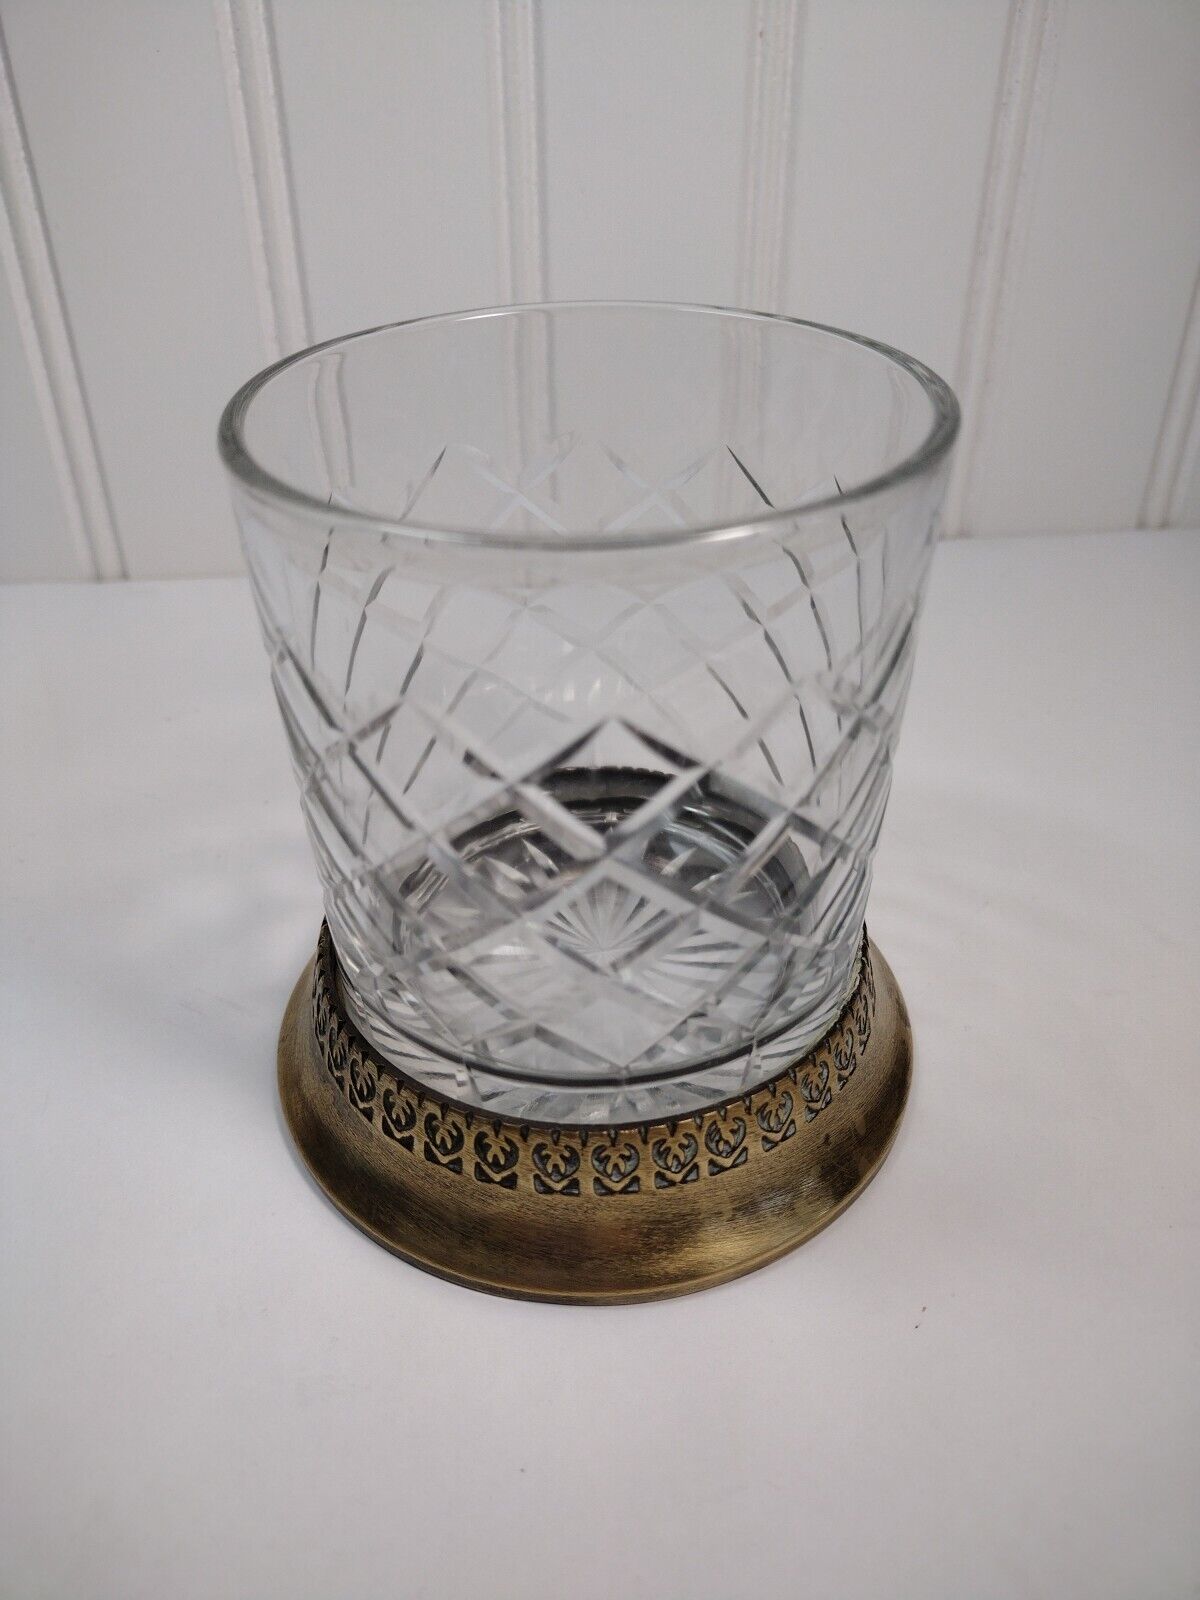 Vintage Whiskey Glass Etched Diamond Design Brass Base 3 1/2 Inches Tall Nice